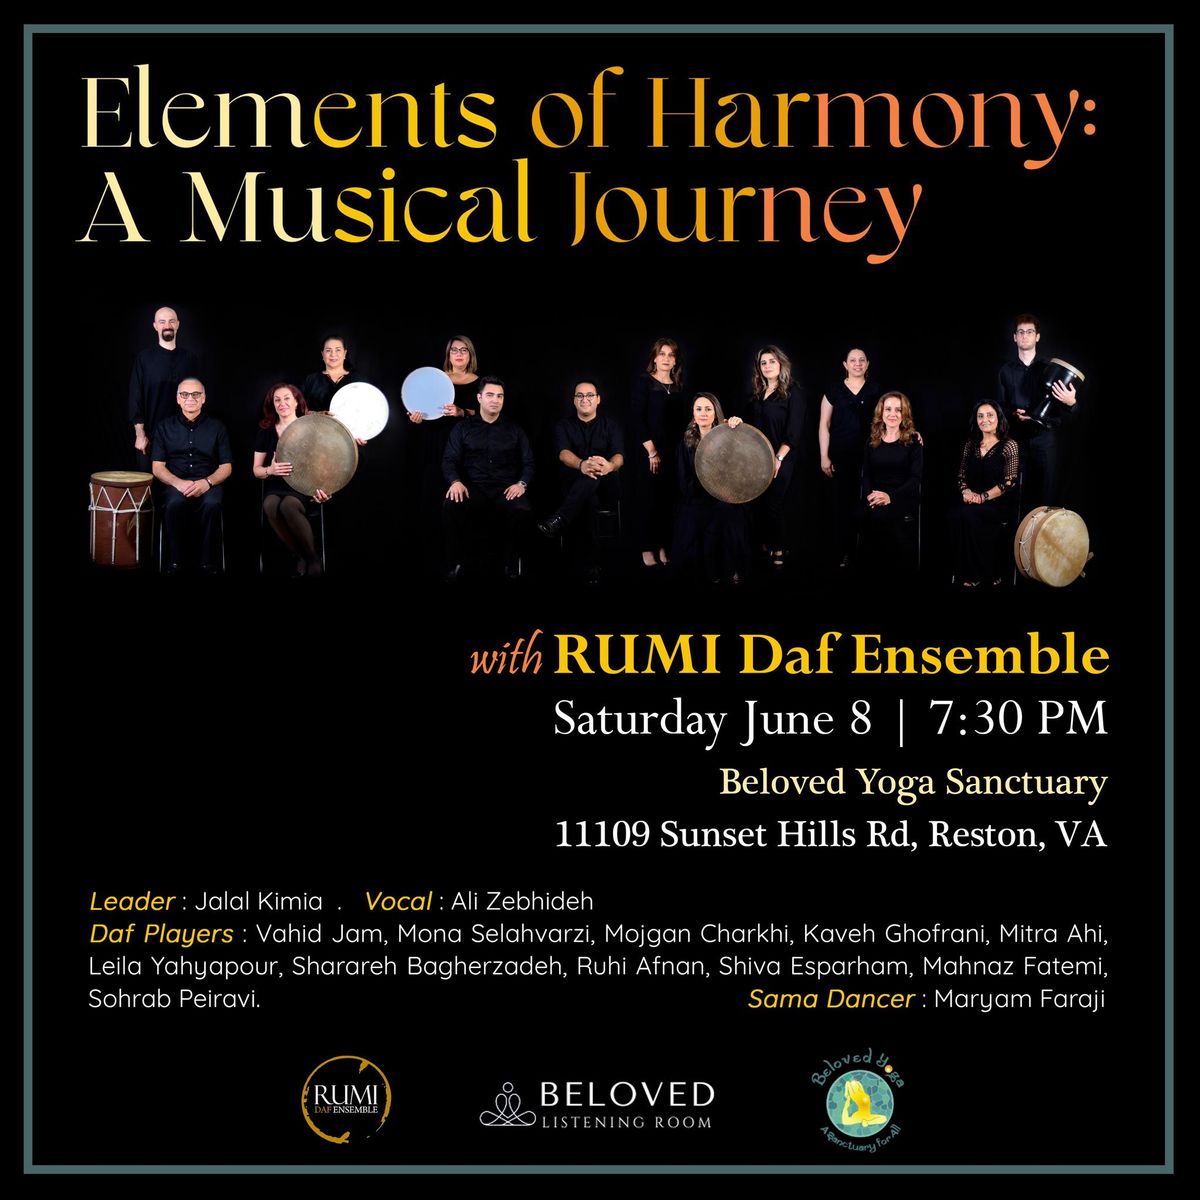 A Musical Journey with Rumi Daf Ensemble